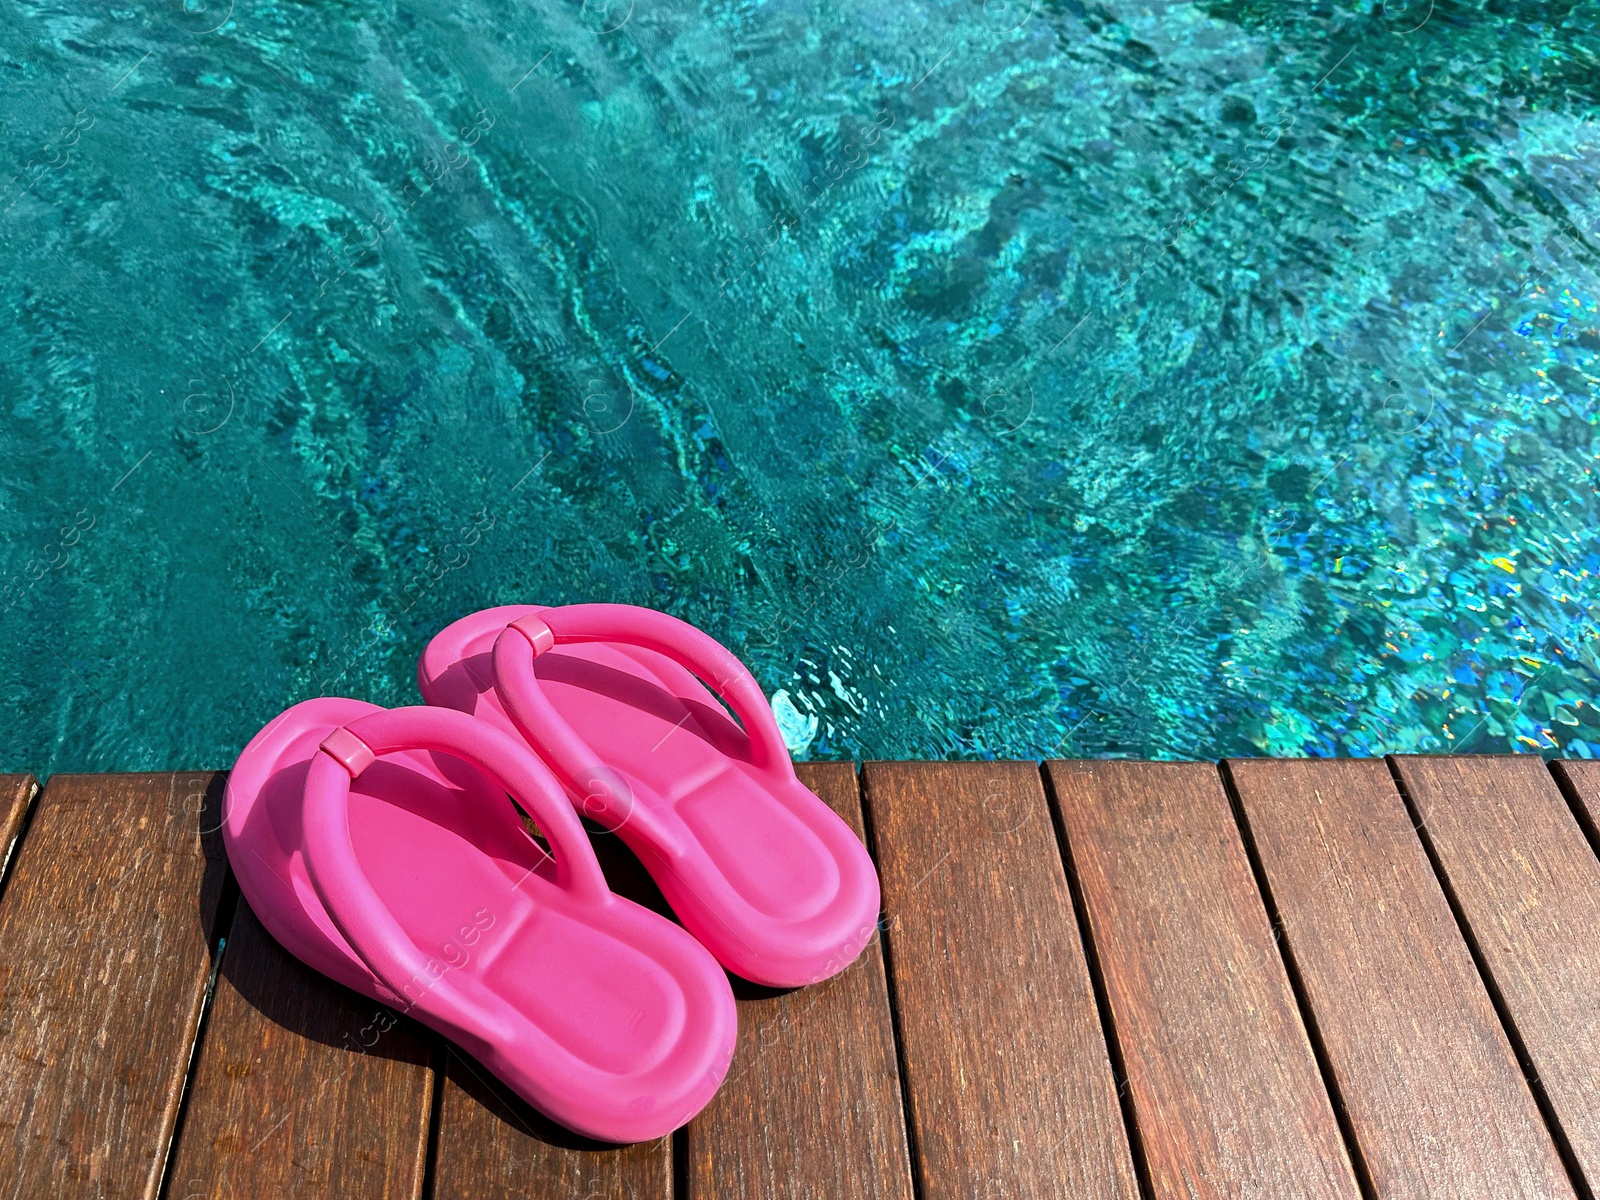 Photo of Clear rippled water in swimming pool and pink flip-flops on wooden deck outdoors. Space for text